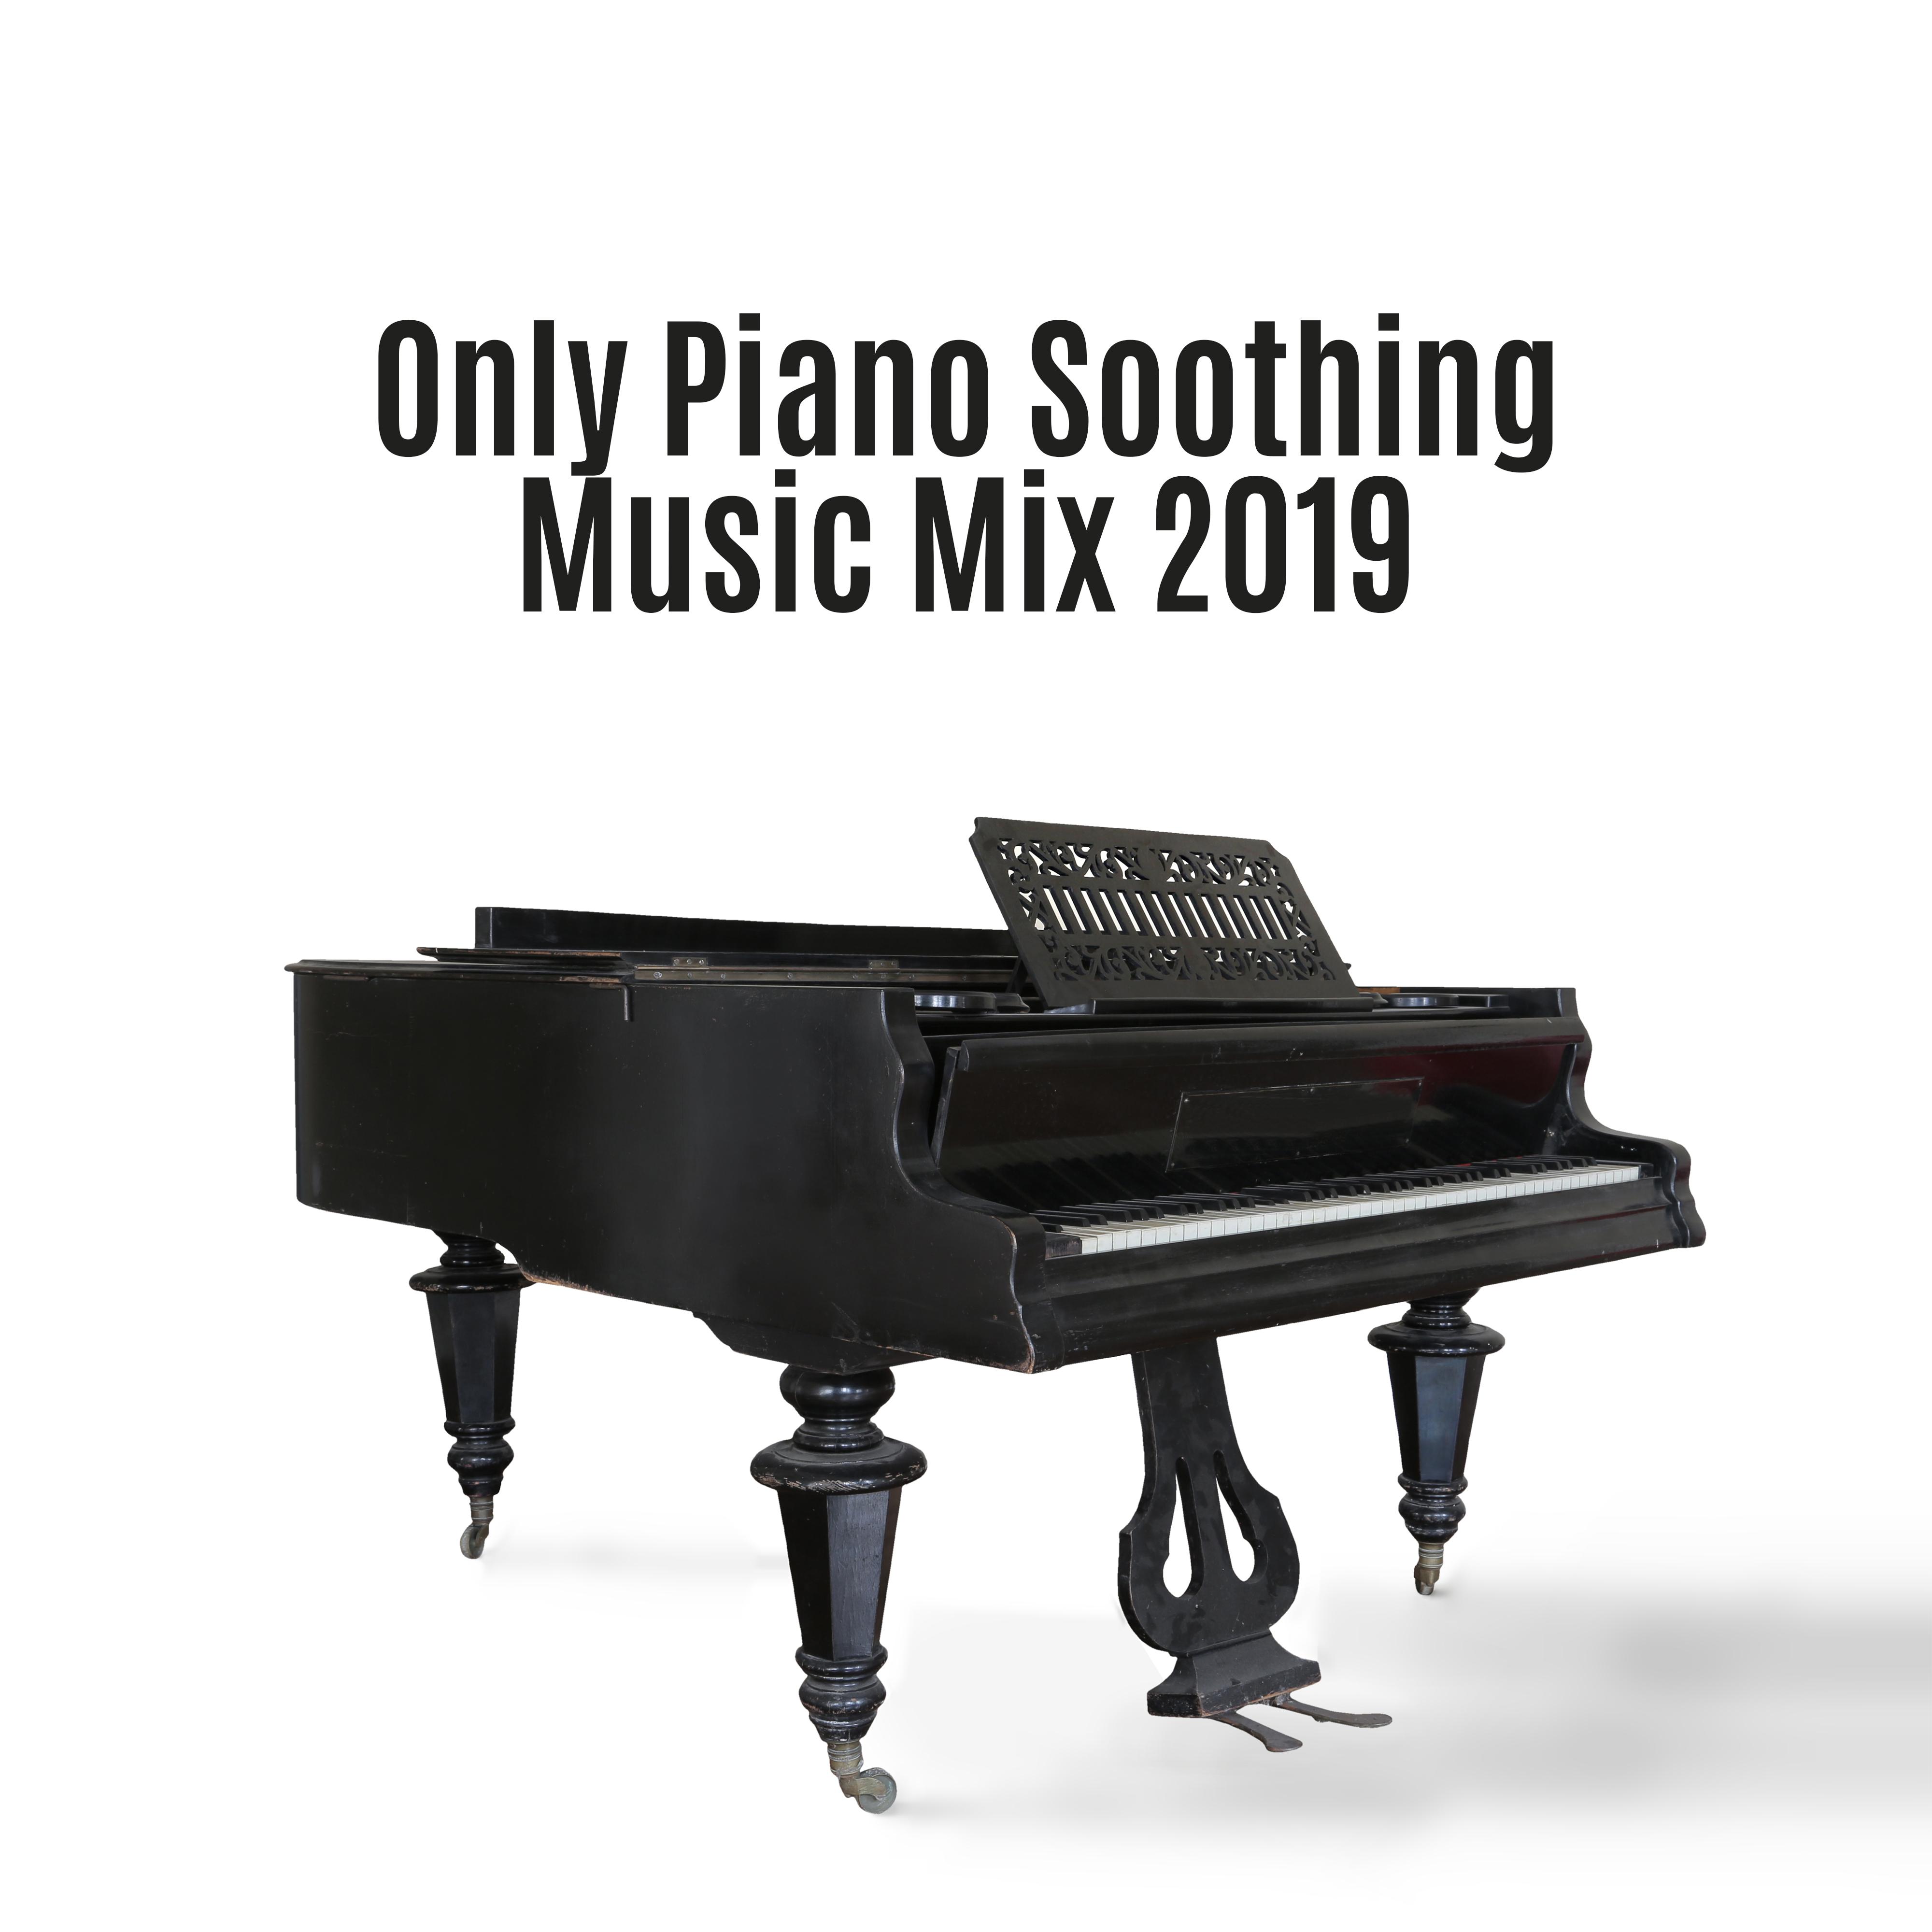 Only Piano Soothing Music Mix 2019